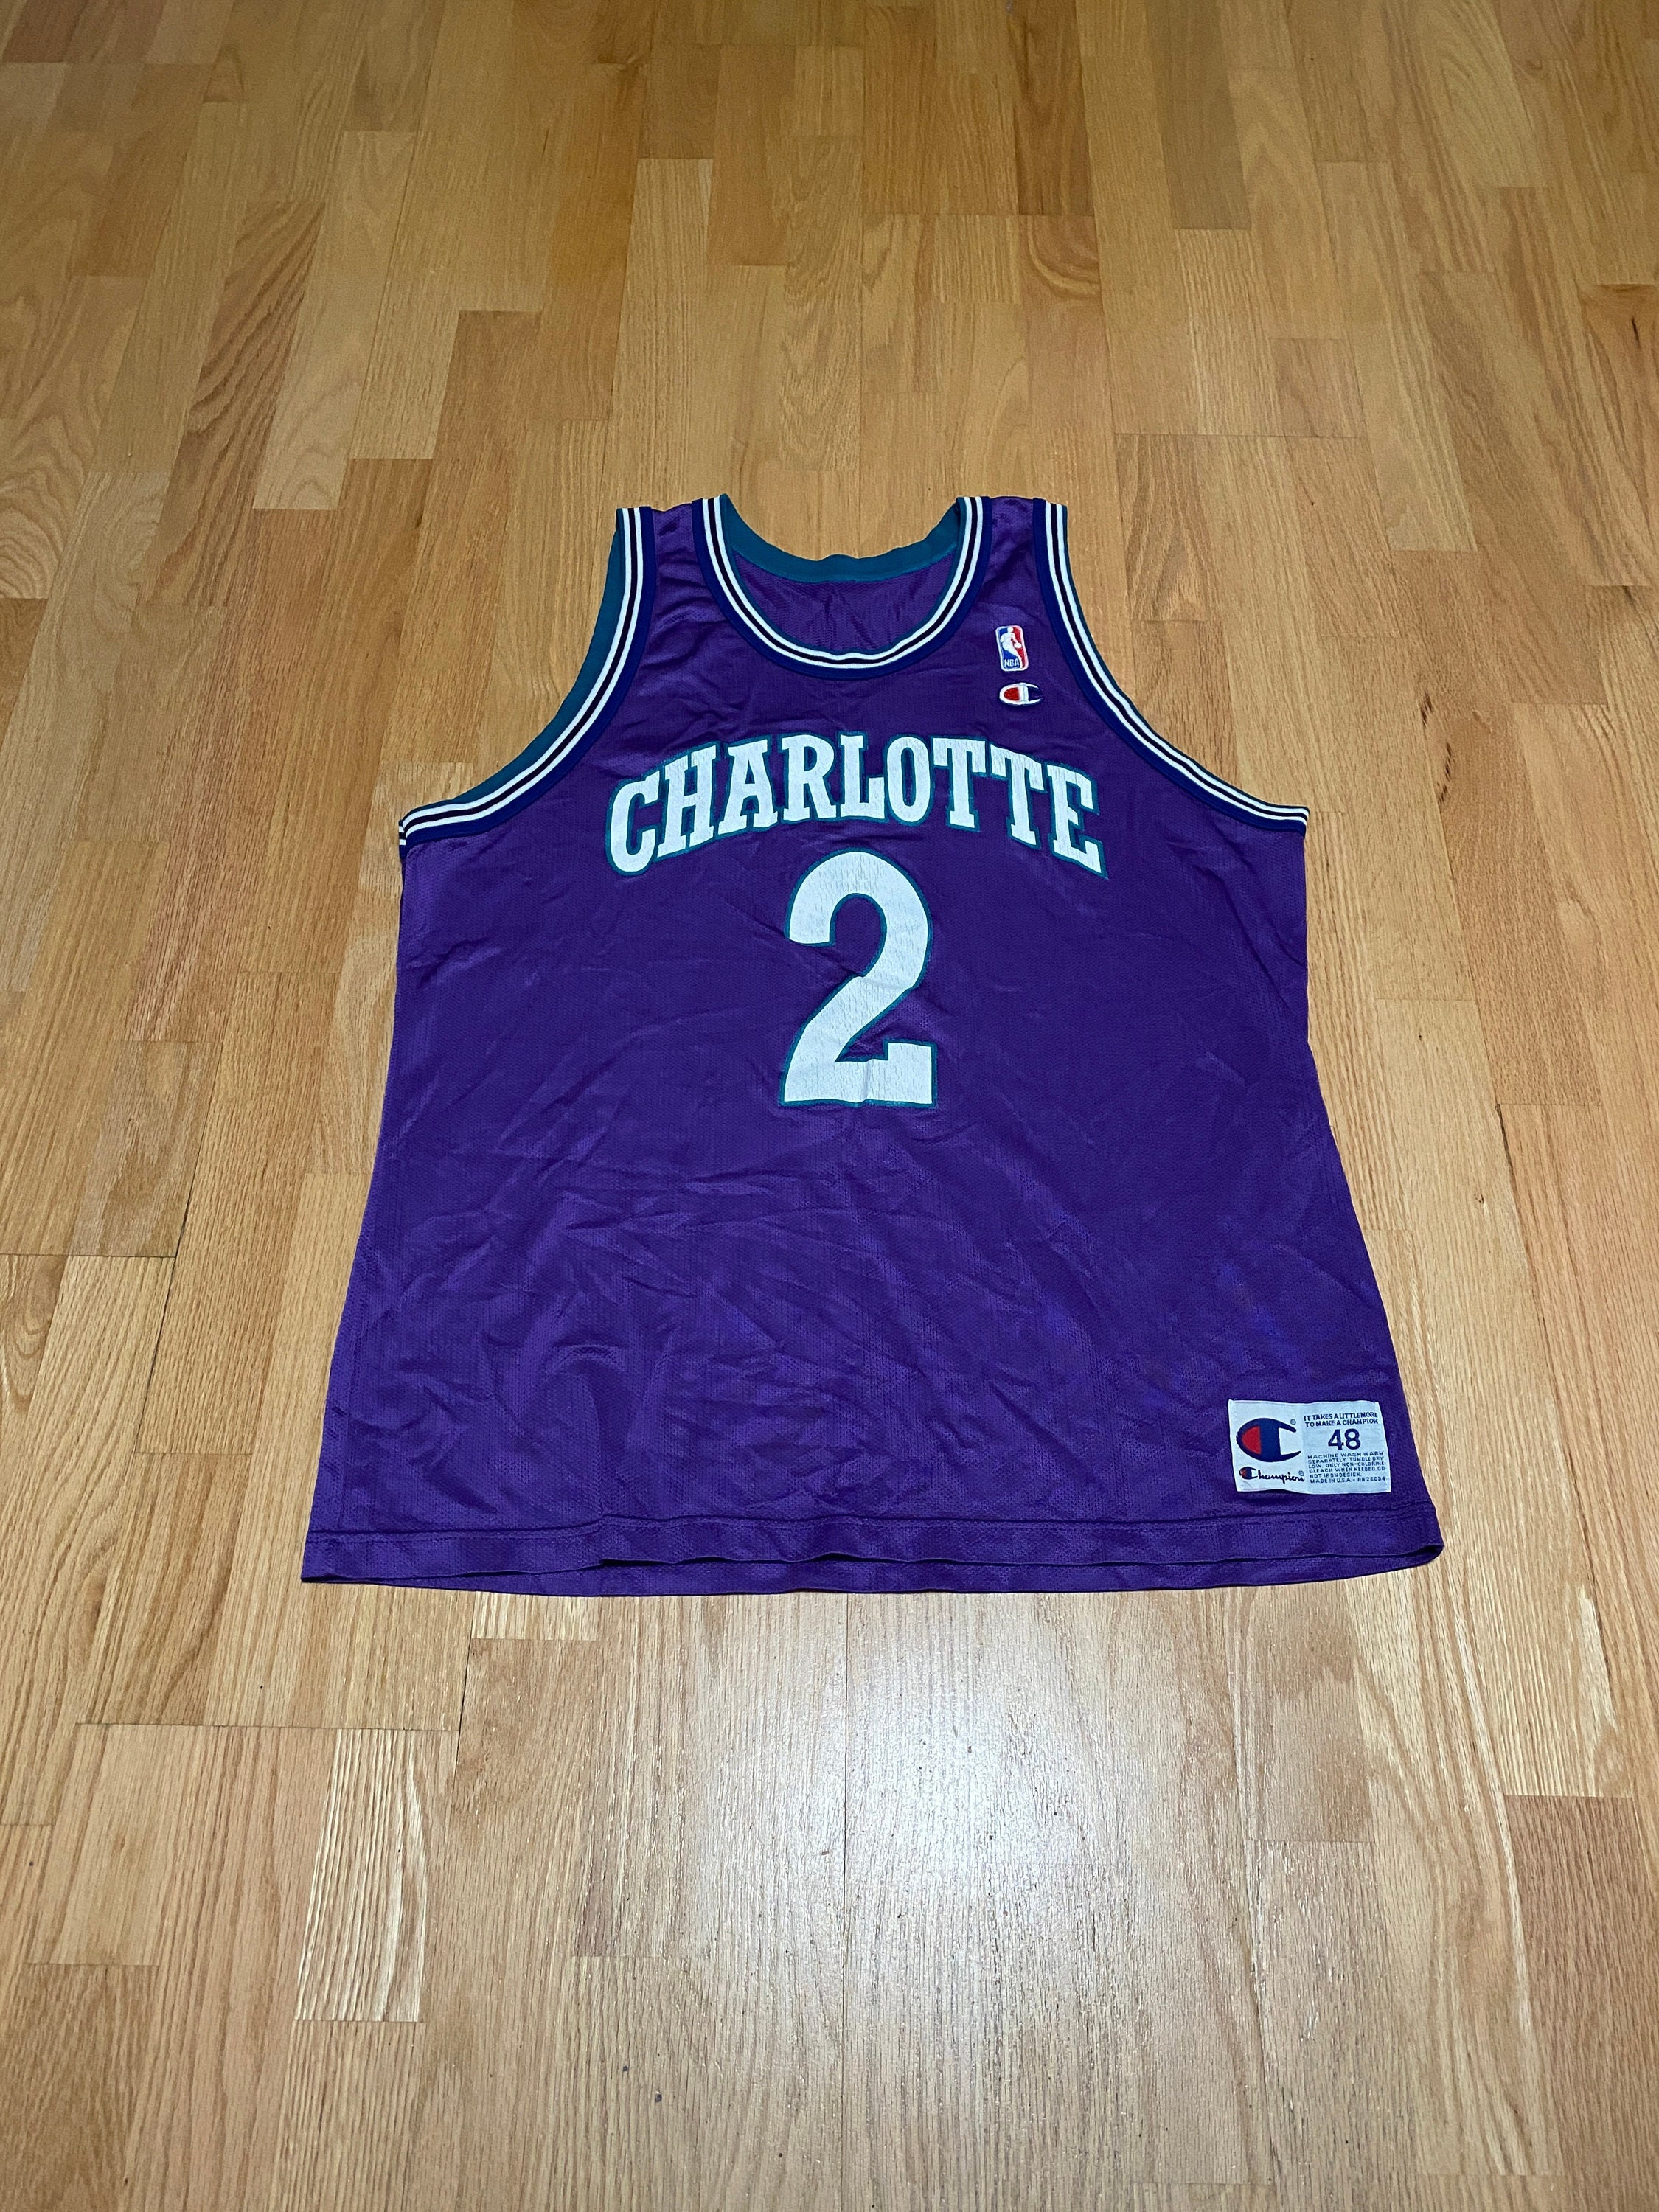 1990s Charlotte Hornets # Game Issued Purple Warm Up Shirt L DP47401 